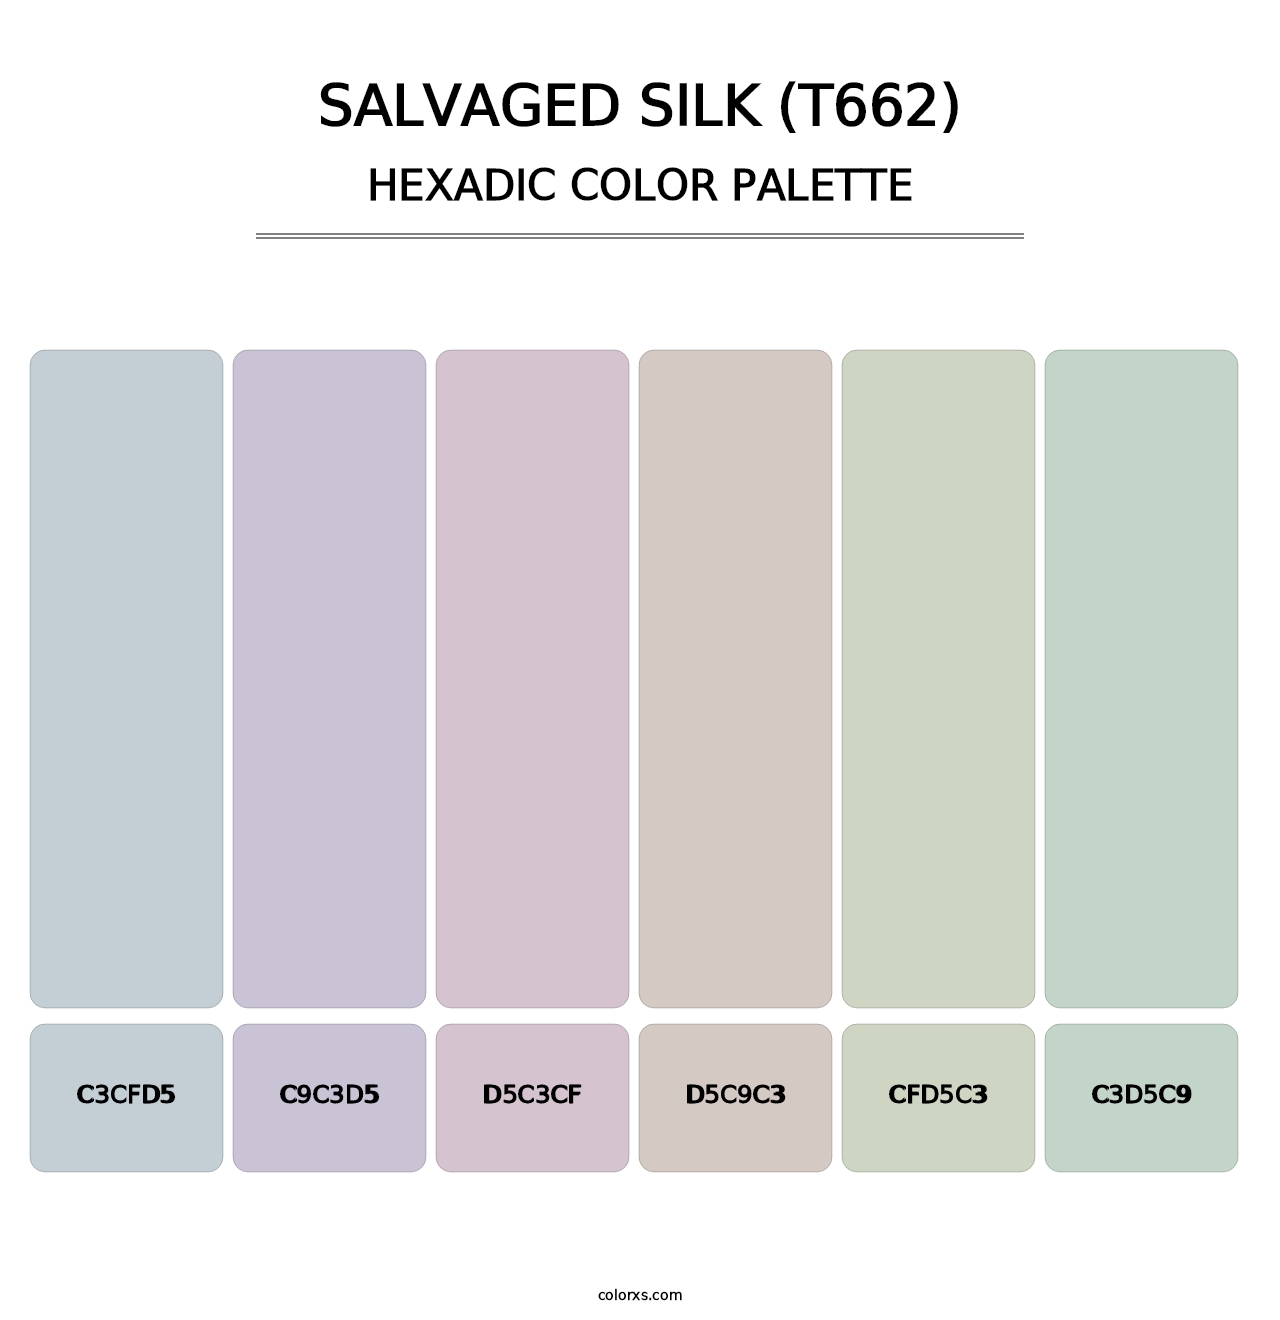 Salvaged Silk (T662) - Hexadic Color Palette